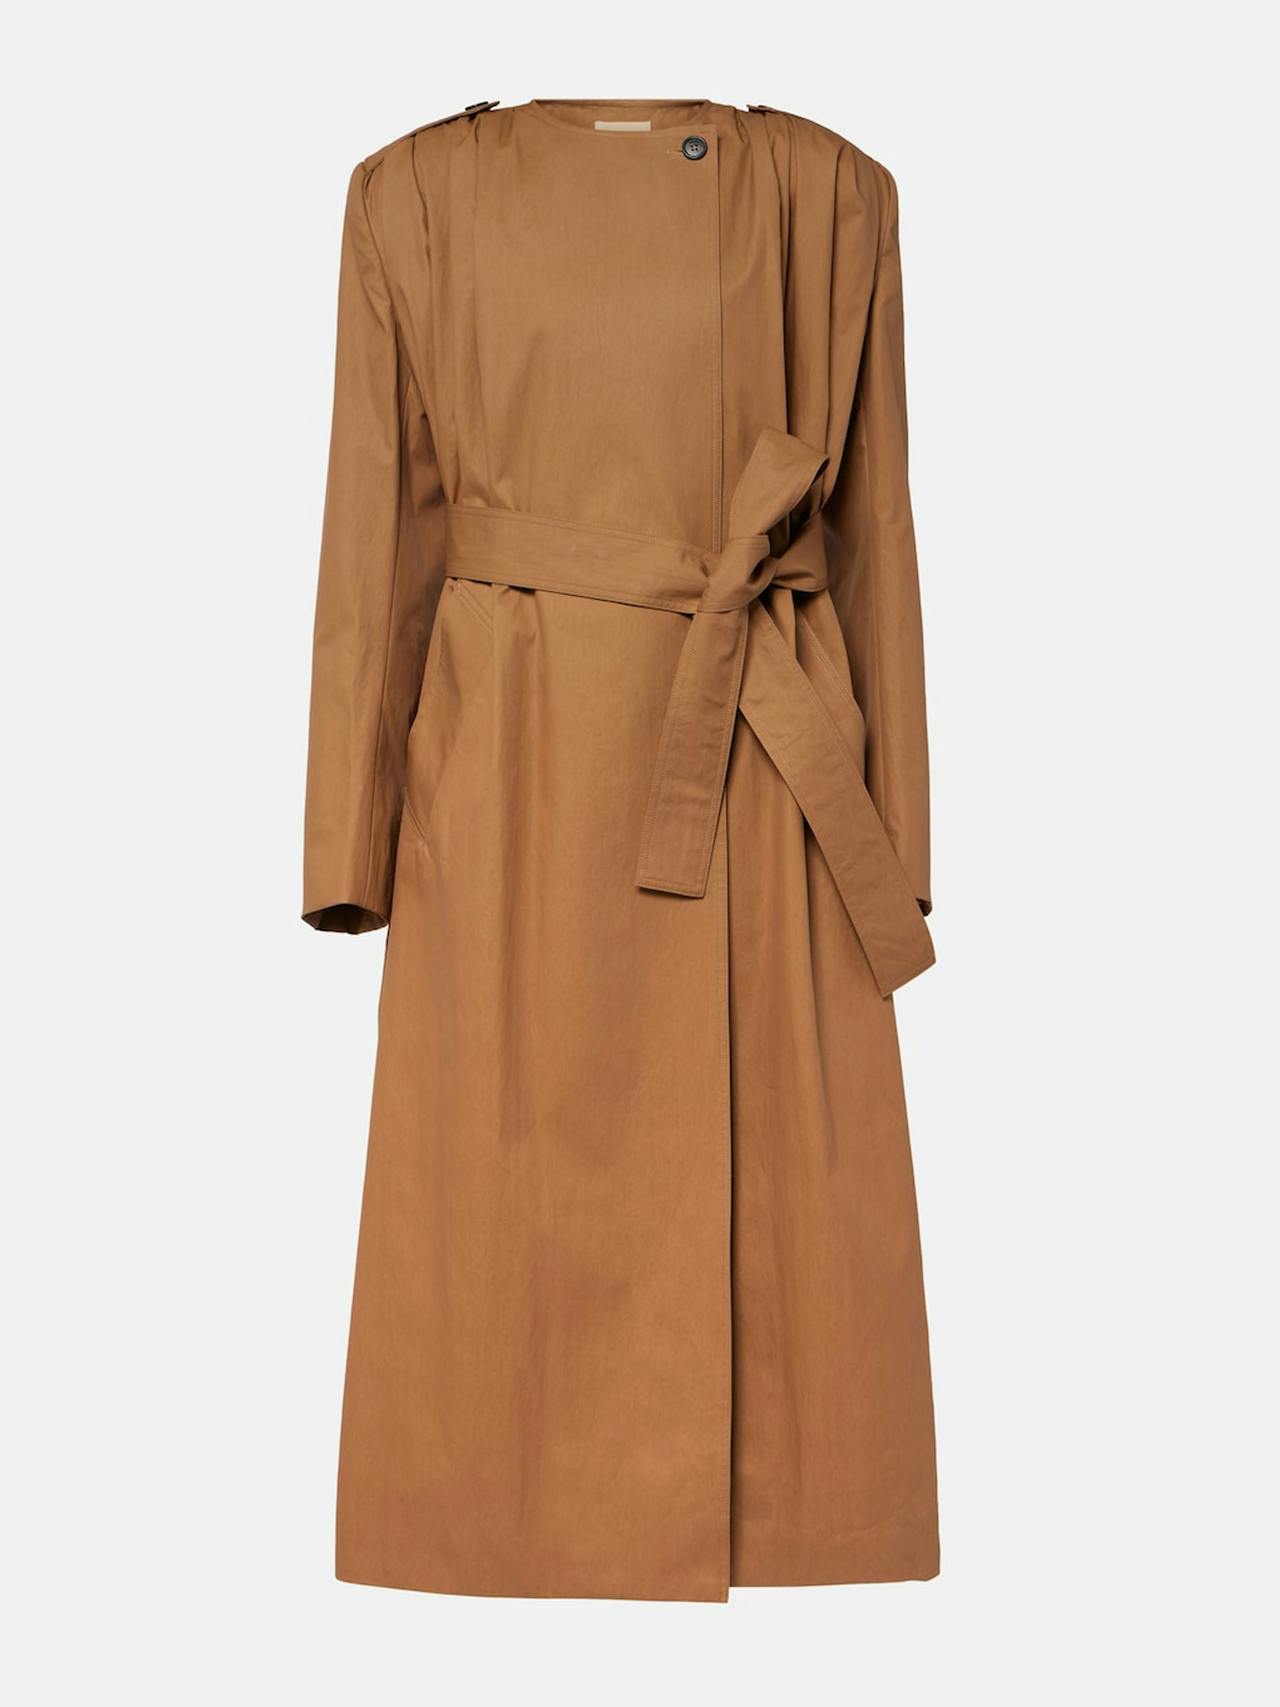 Minnler cotton-blend twill trench coat